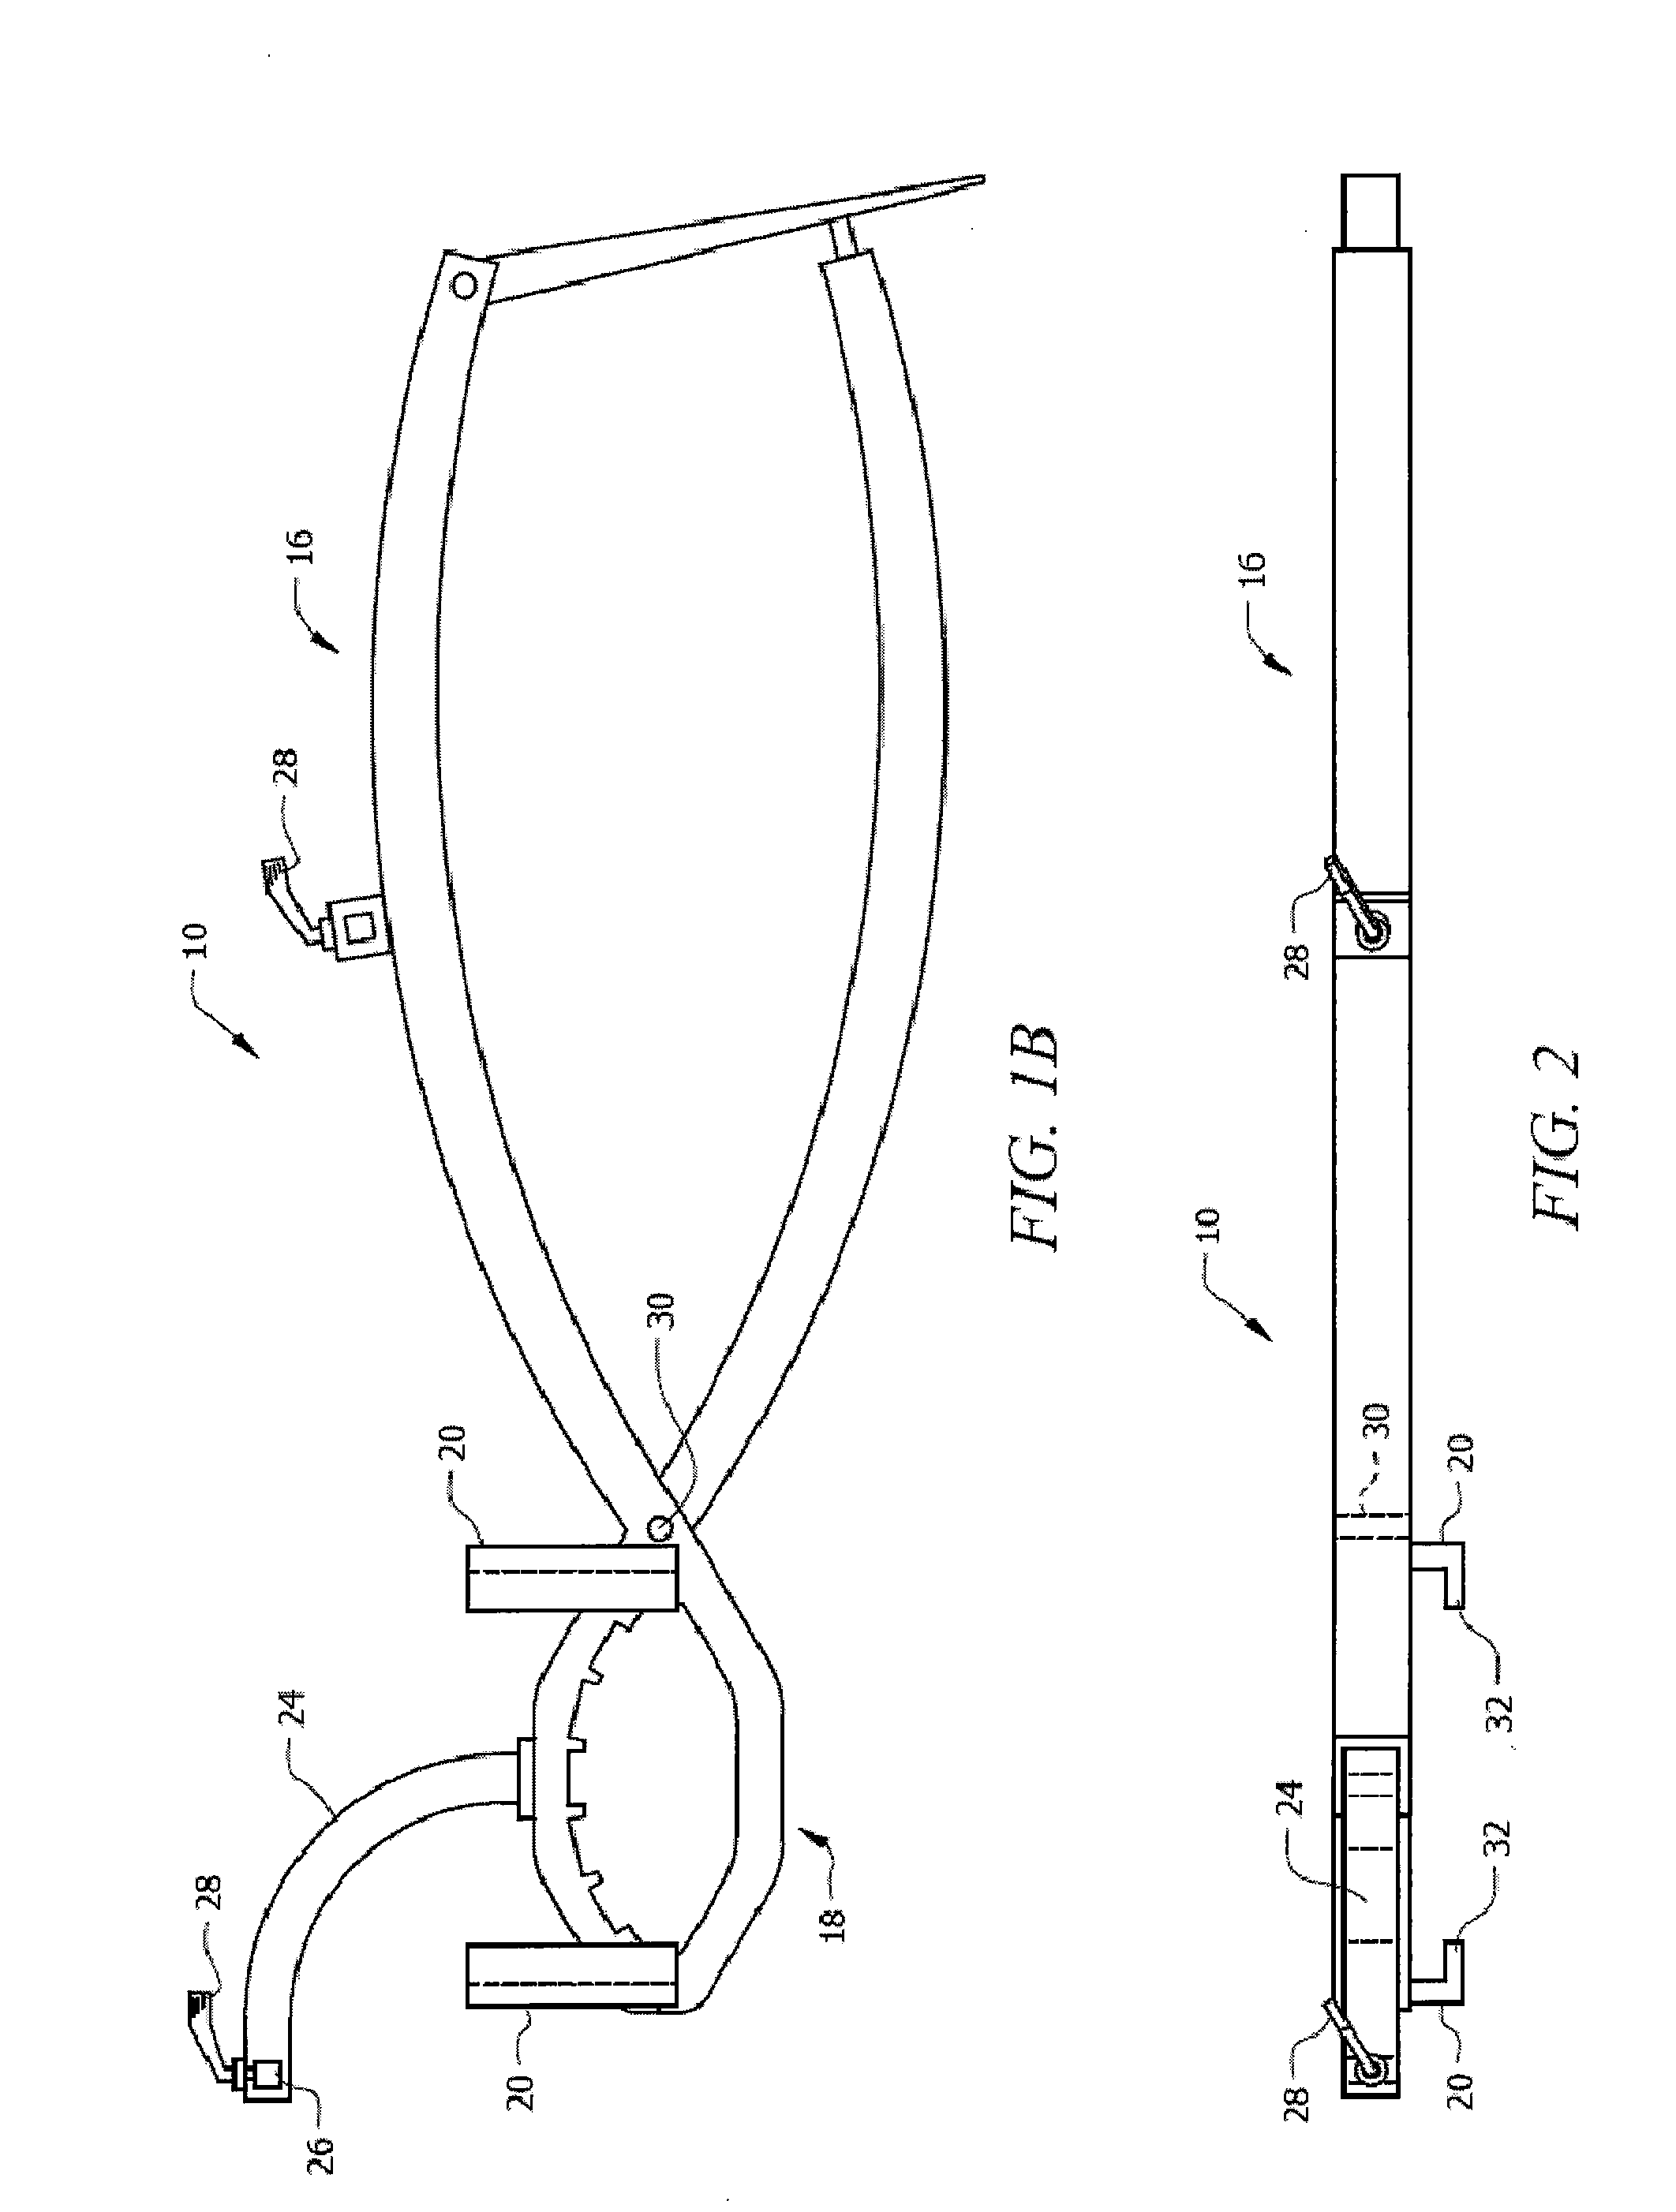 Apparatus for Osteotomy and Graft Preparation